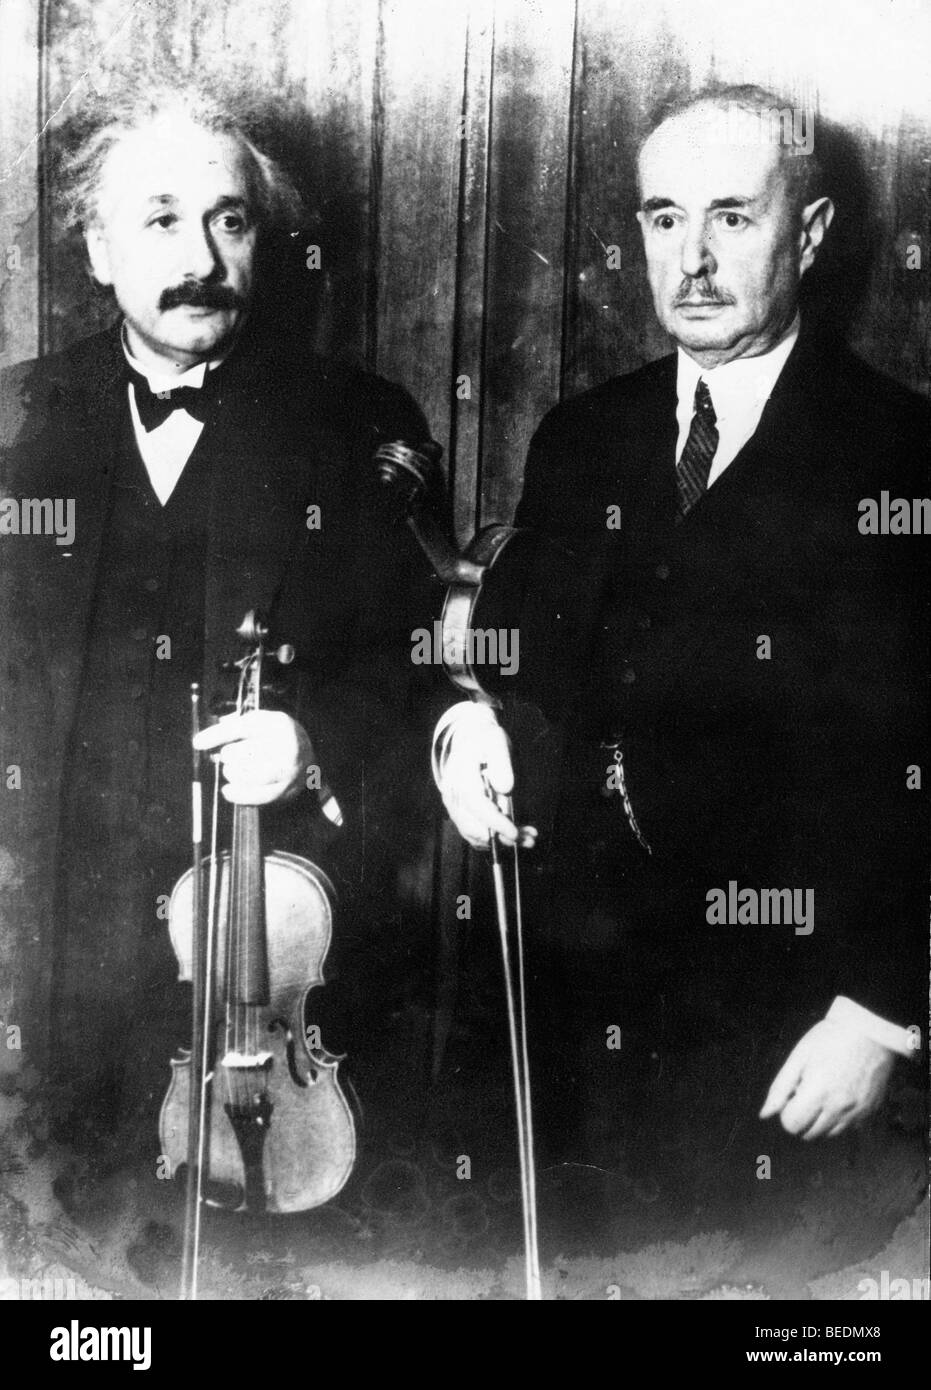 Professor Albert Einstein and Louis Lewandowsky playing the violin for a Judaism Classical concert Stock Photo